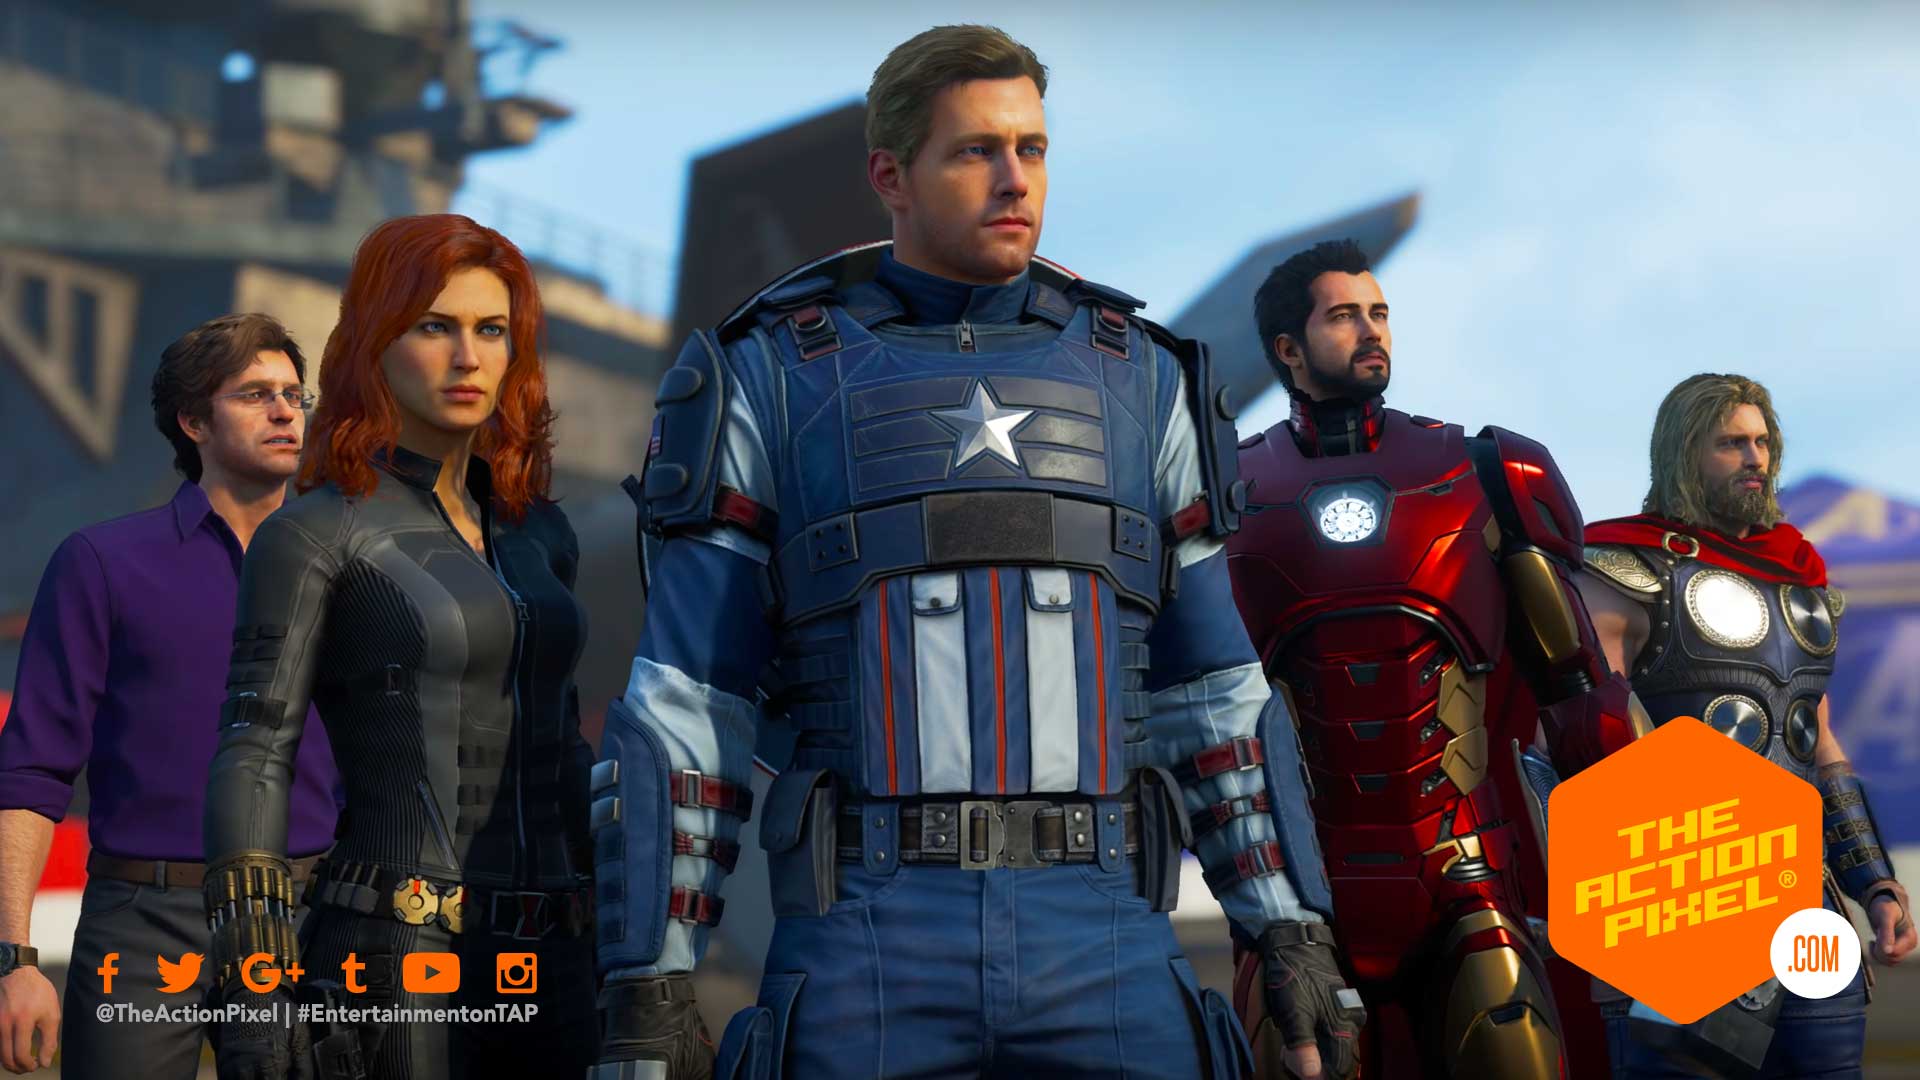 avengers, square enix, square enix marvel's avengers, marvel's avengers, avengers, marvel's avengers worldwide reveal, the action pixel, entertainment on tap, marvel games, marvel comics, e3 2019, e3, electronic entertainment expo, featured, a day, avengers day, gameplay video, featured,